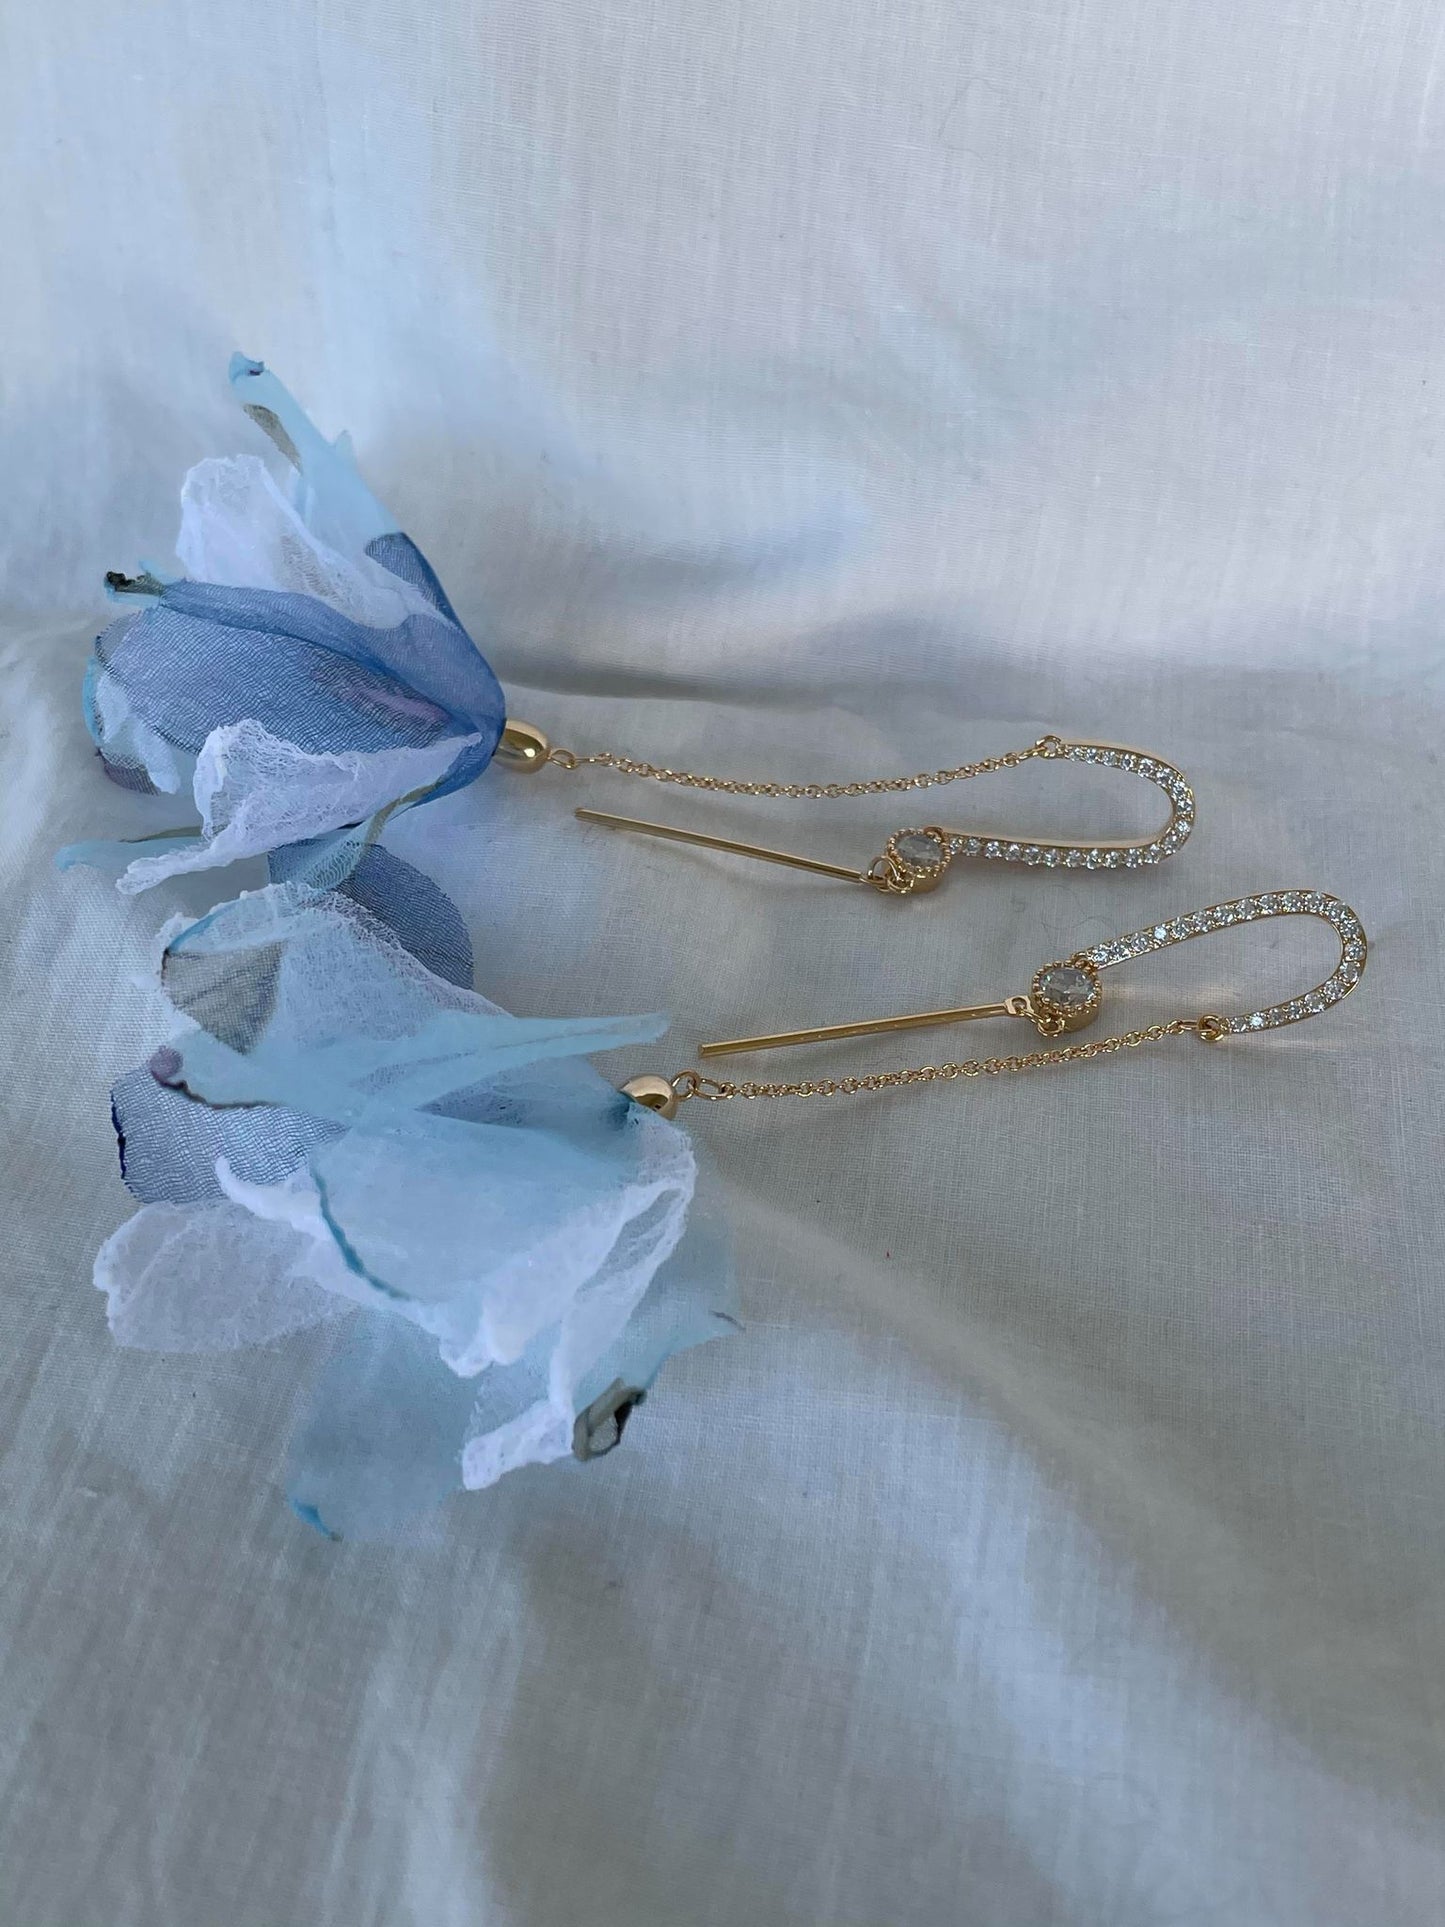 Fabric flowers on gold chain and crystal drop earrings